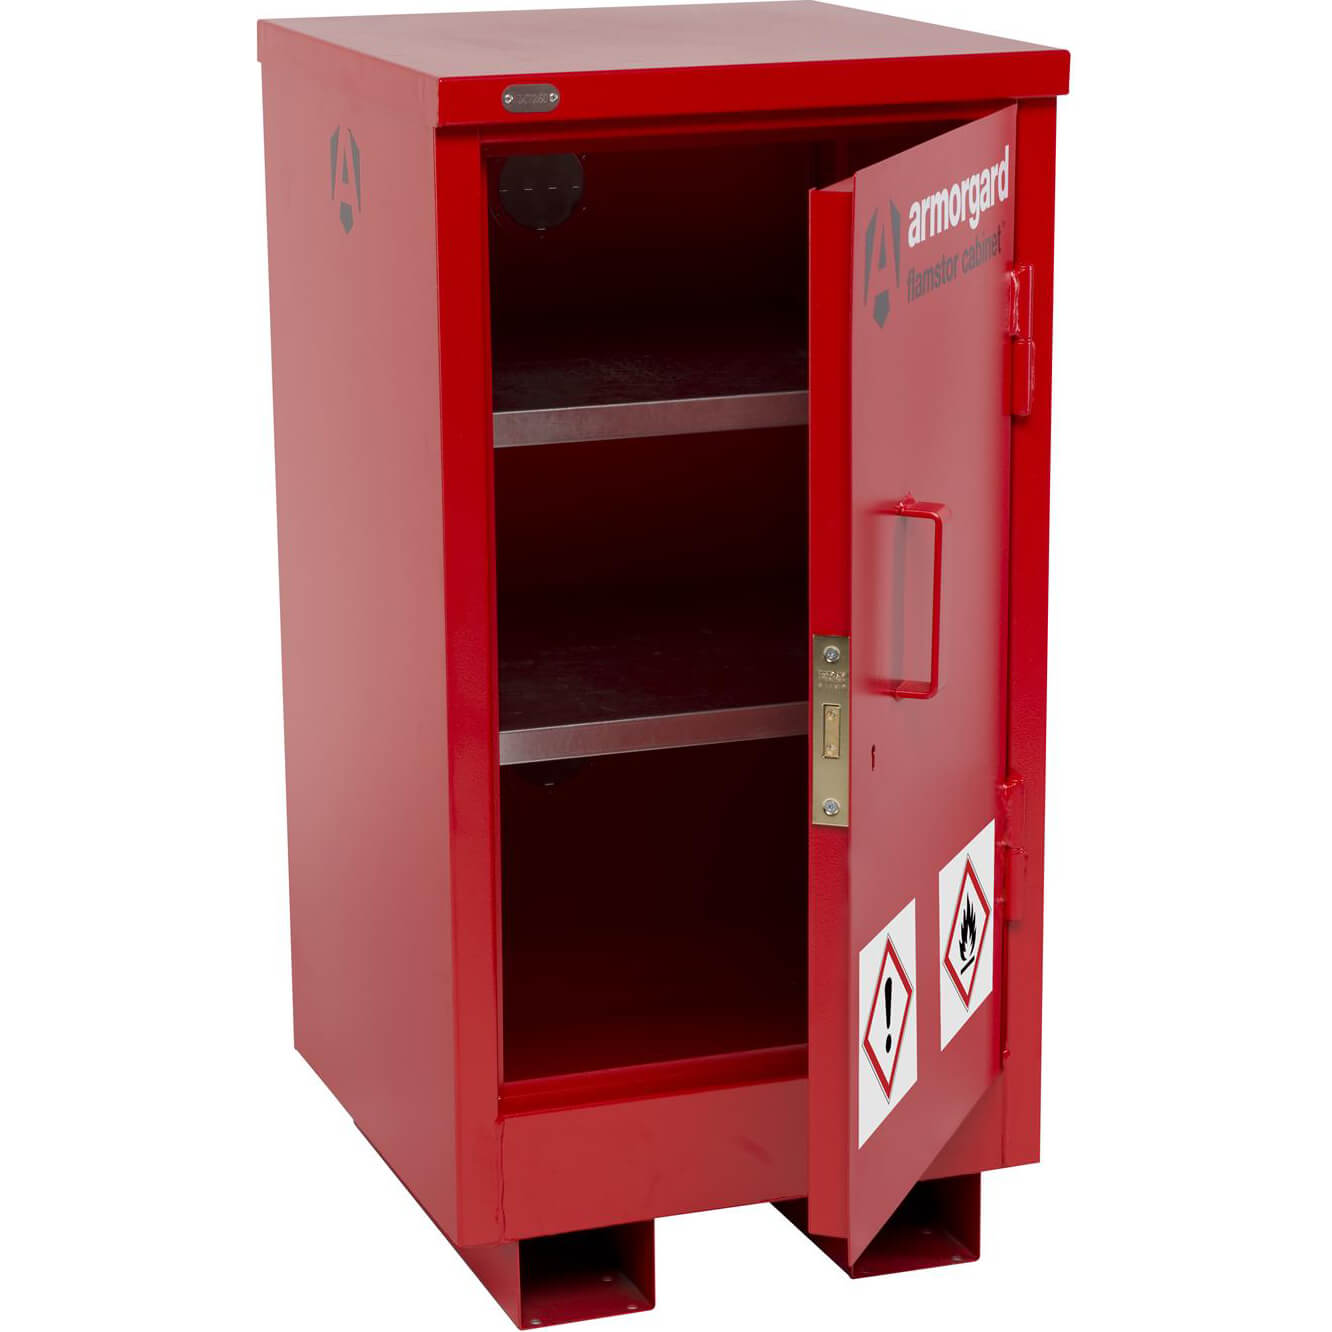 Image of Armorgard Flamstor Chemical and Flammables Hazardous Cabinet 500mm 530mm 980mm